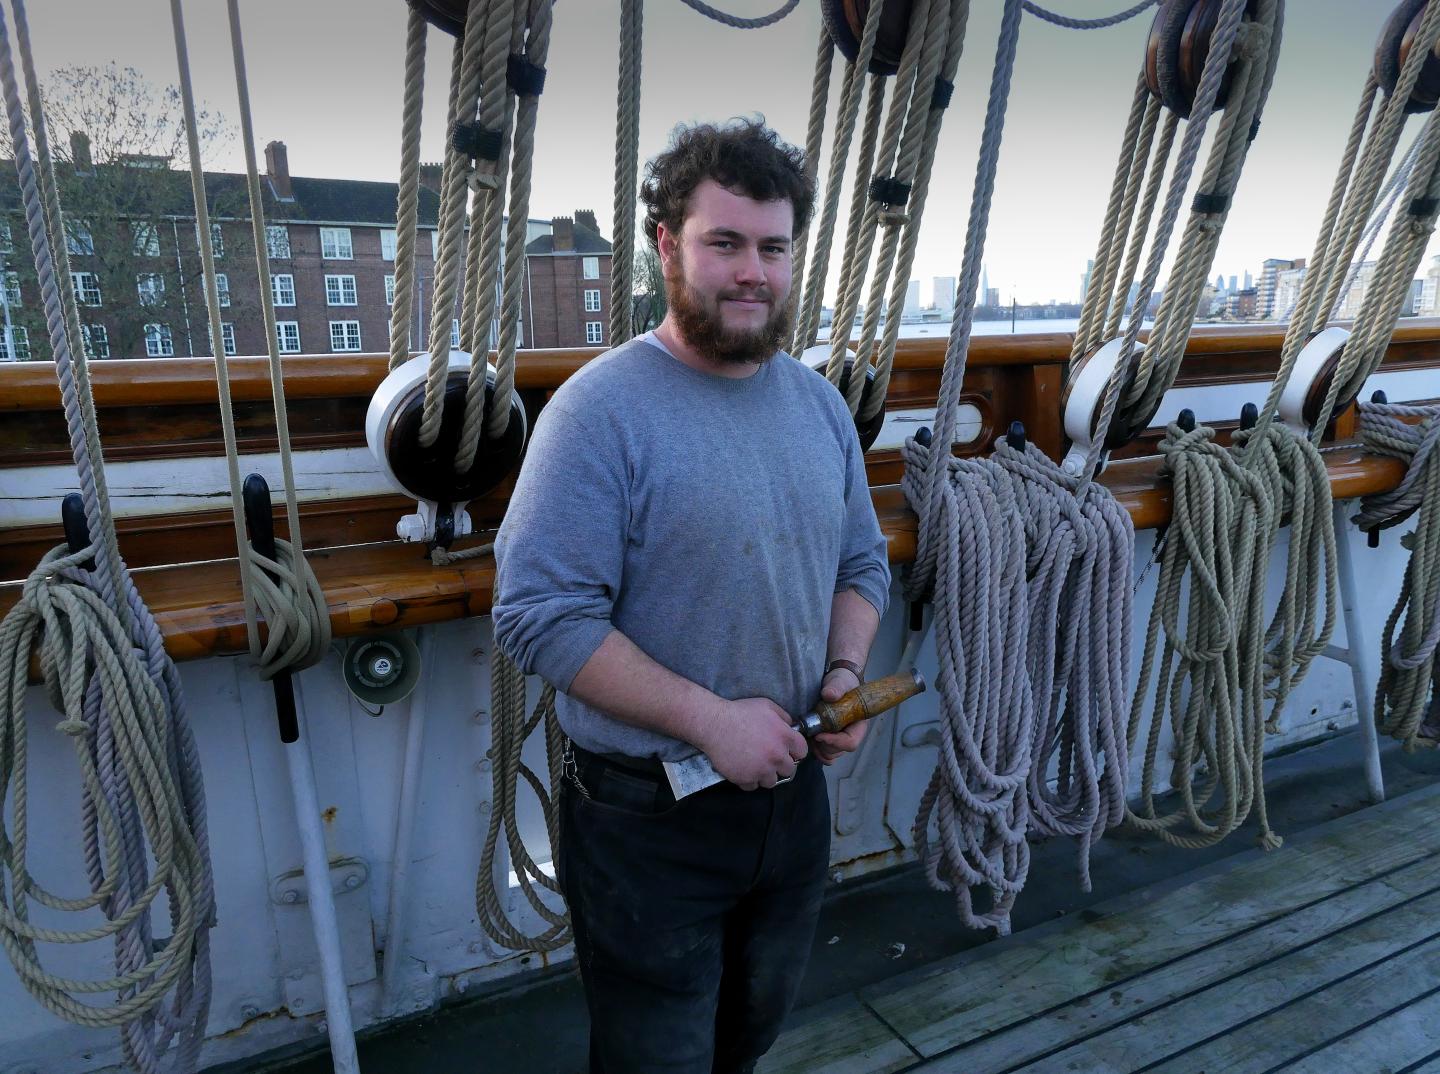 A man wearing a grey jumper stands on the deck of Cutty Sark holding a chisel